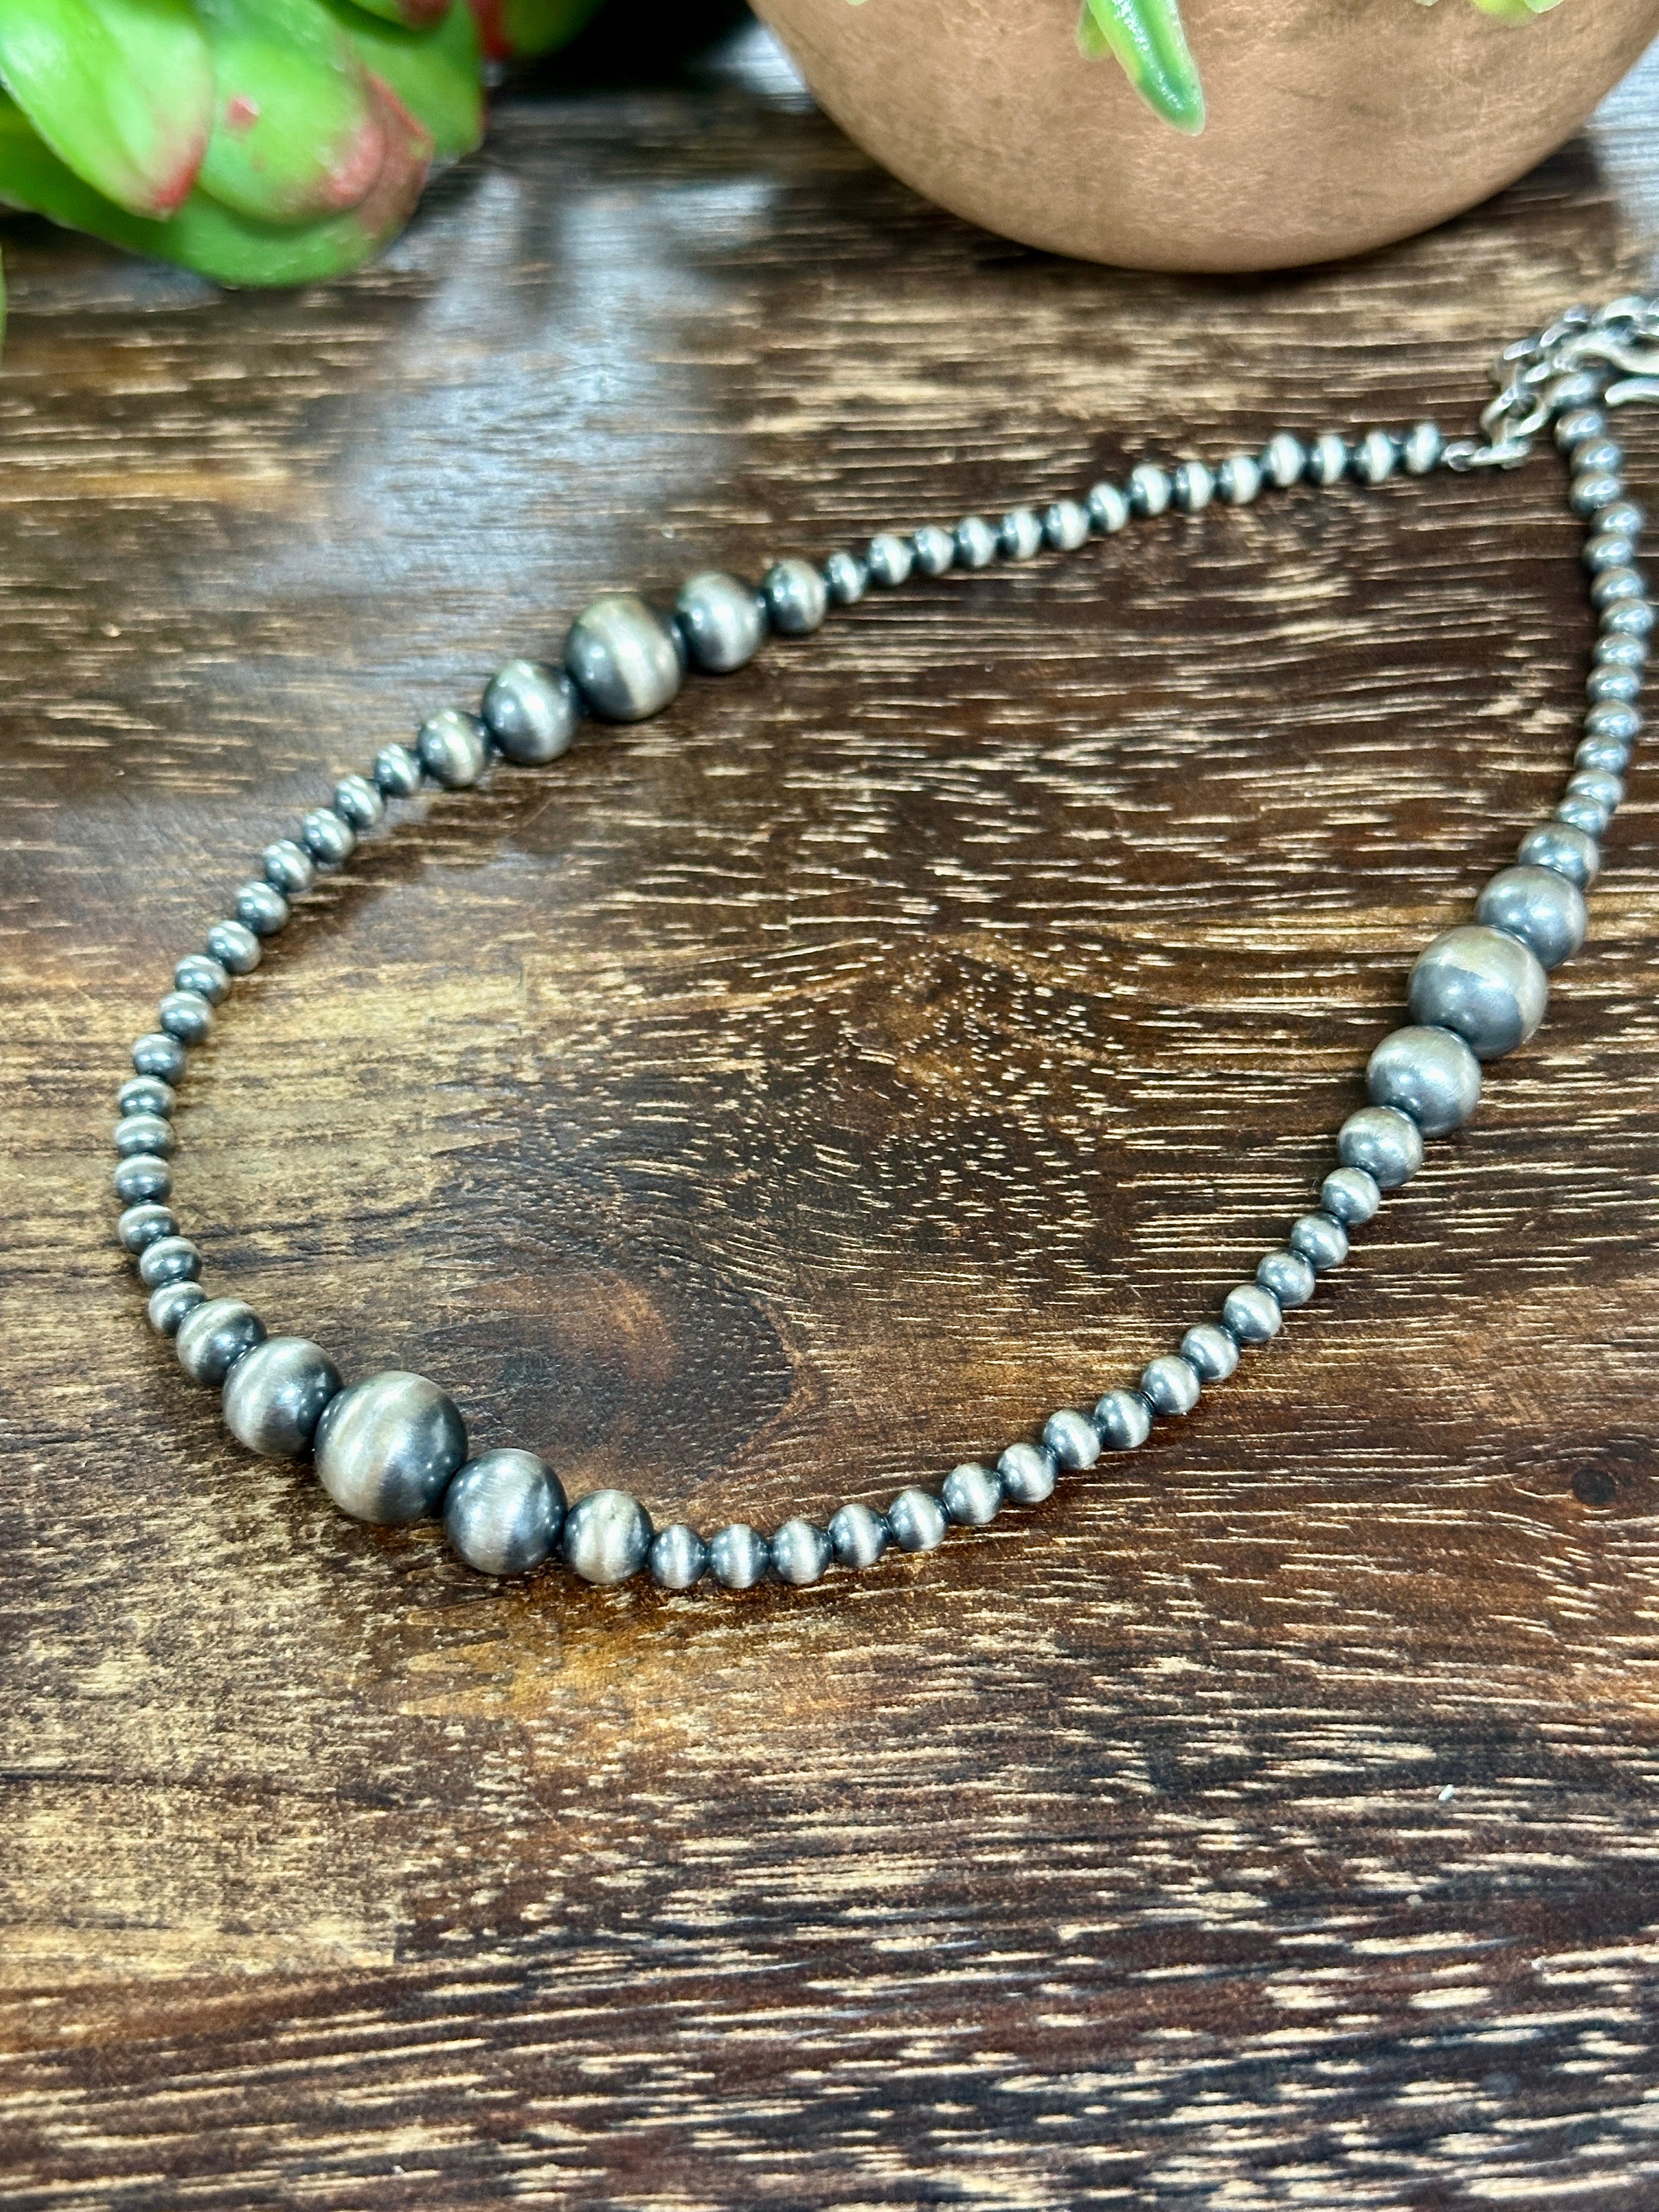 Southwest Handmade Sterling Silver Graduated Pearl Necklace